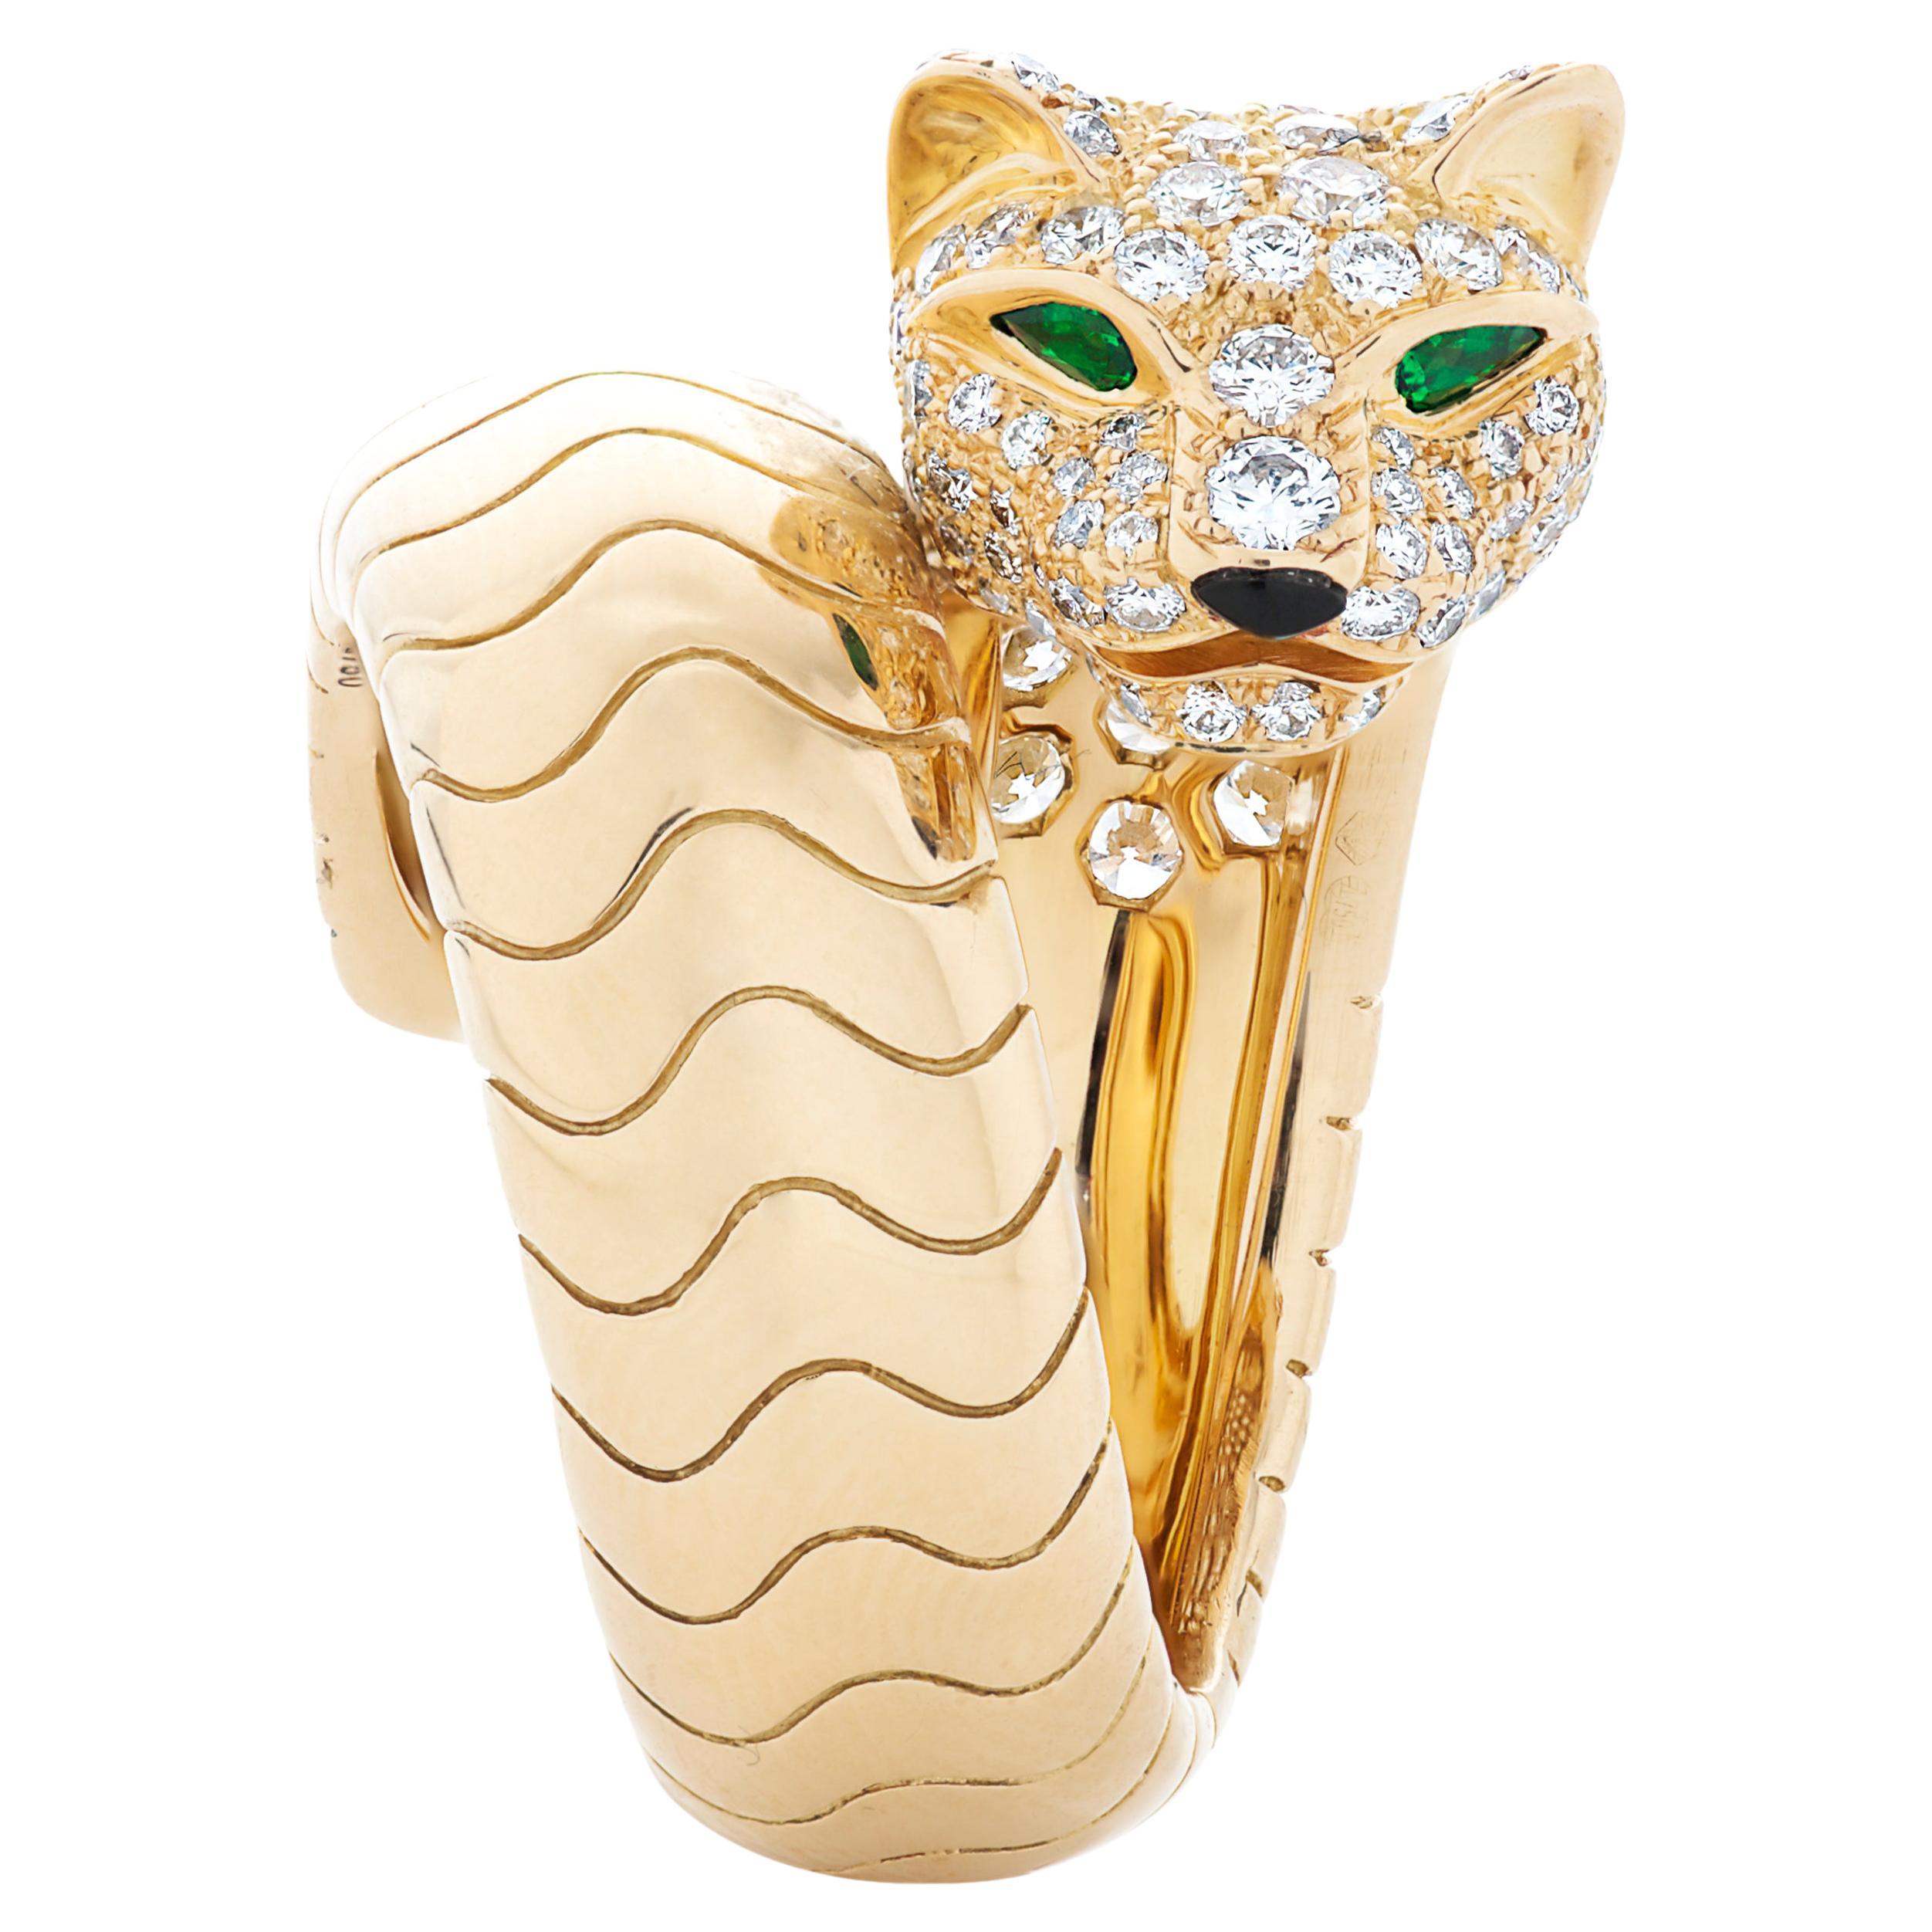 Panthere De Cartier Pave Diamond, Emerald & Onyx Bypass Ring in 18k Yellow Gold